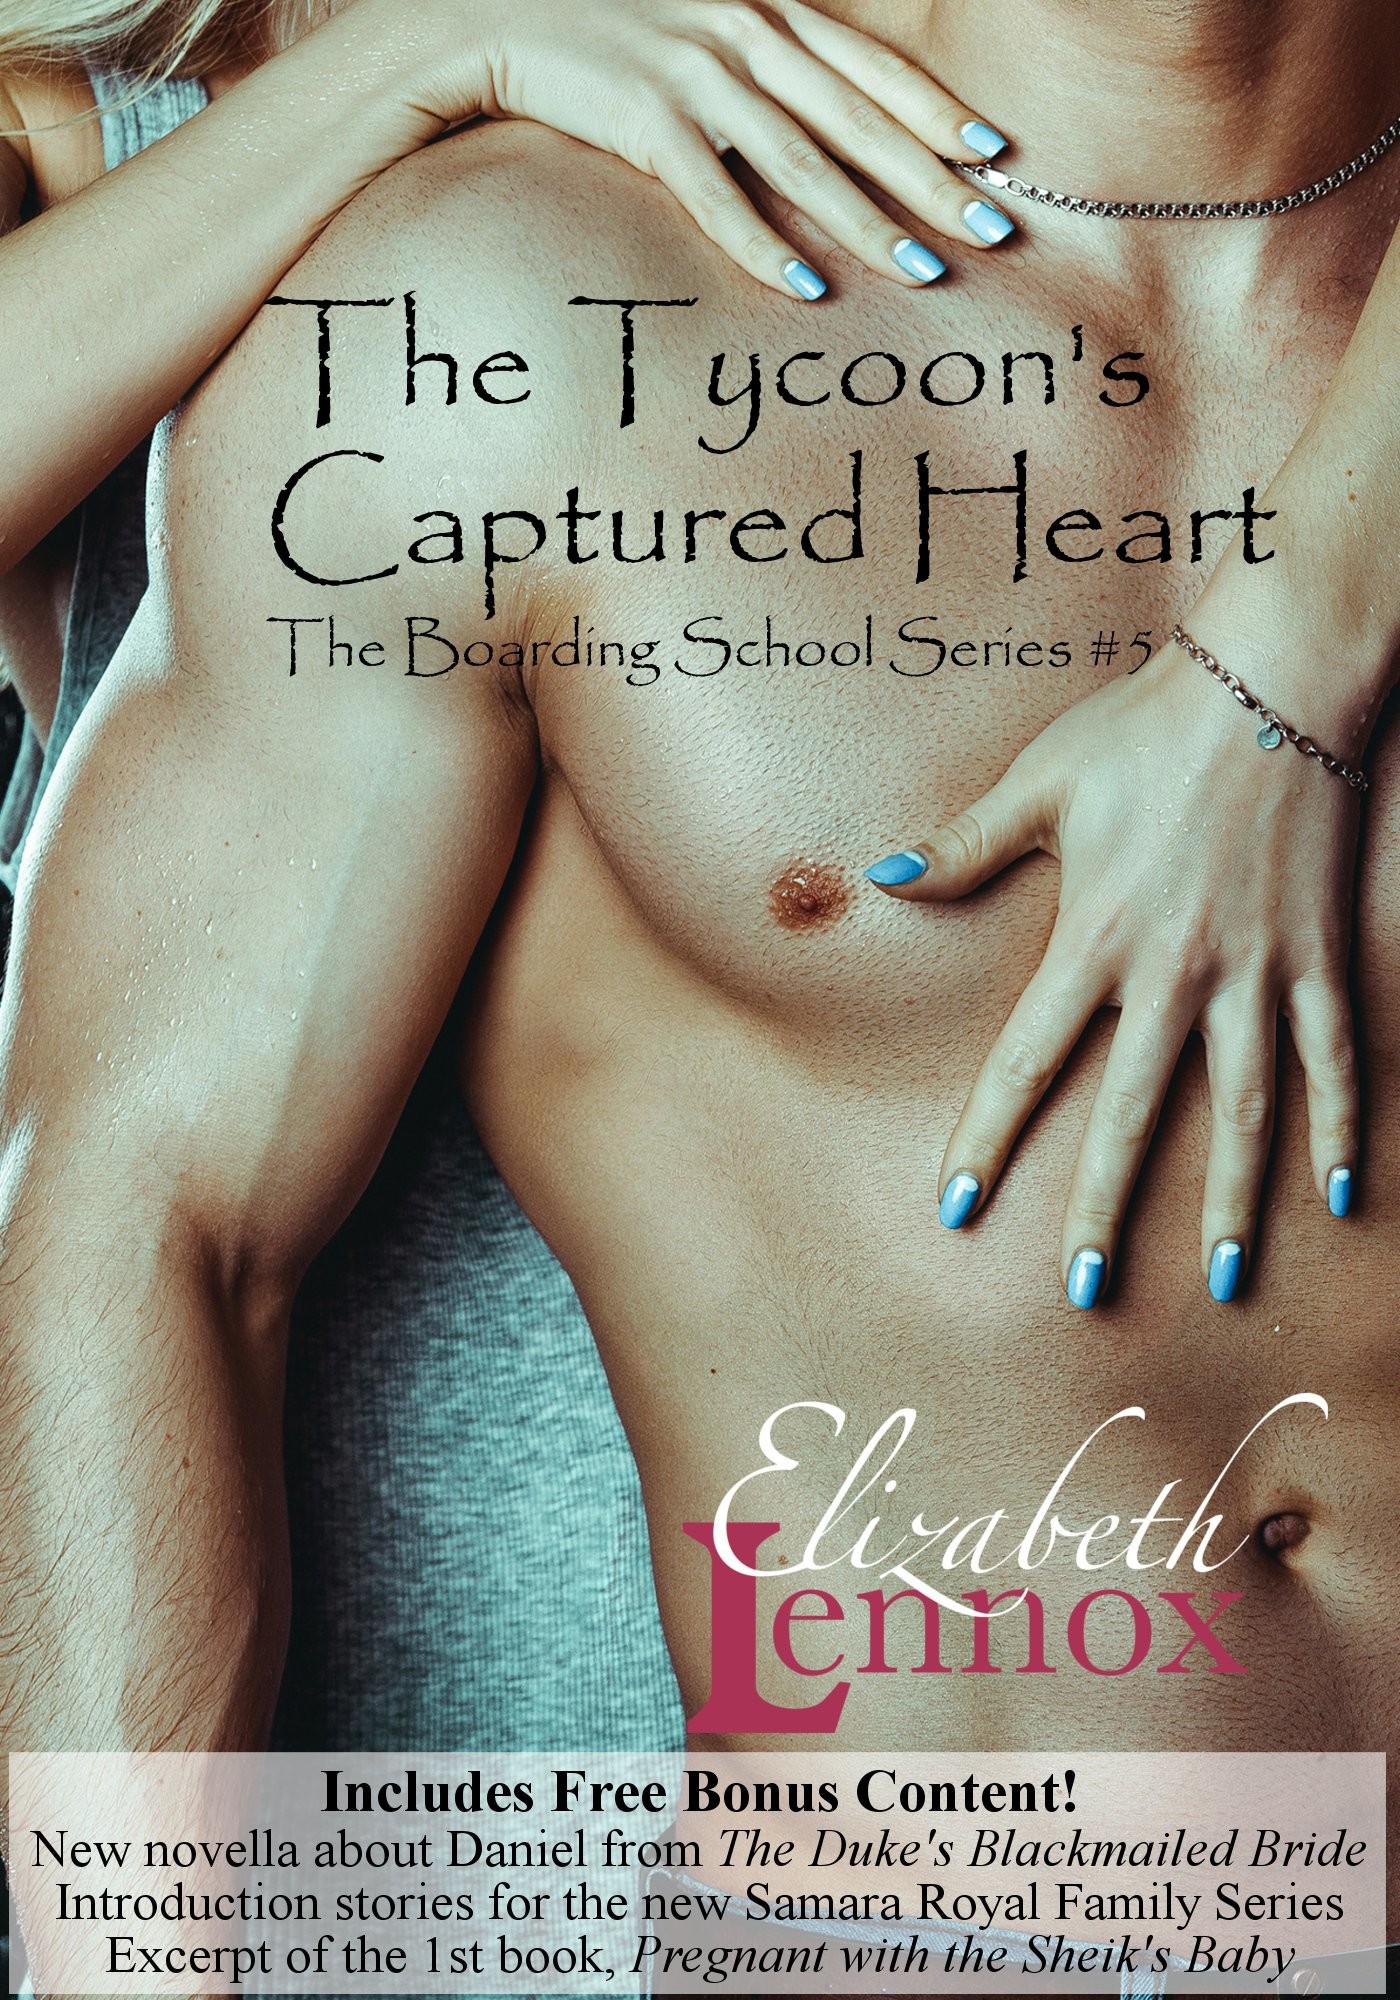 The Tycoon's Captured Heart by Elizabeth Lennox